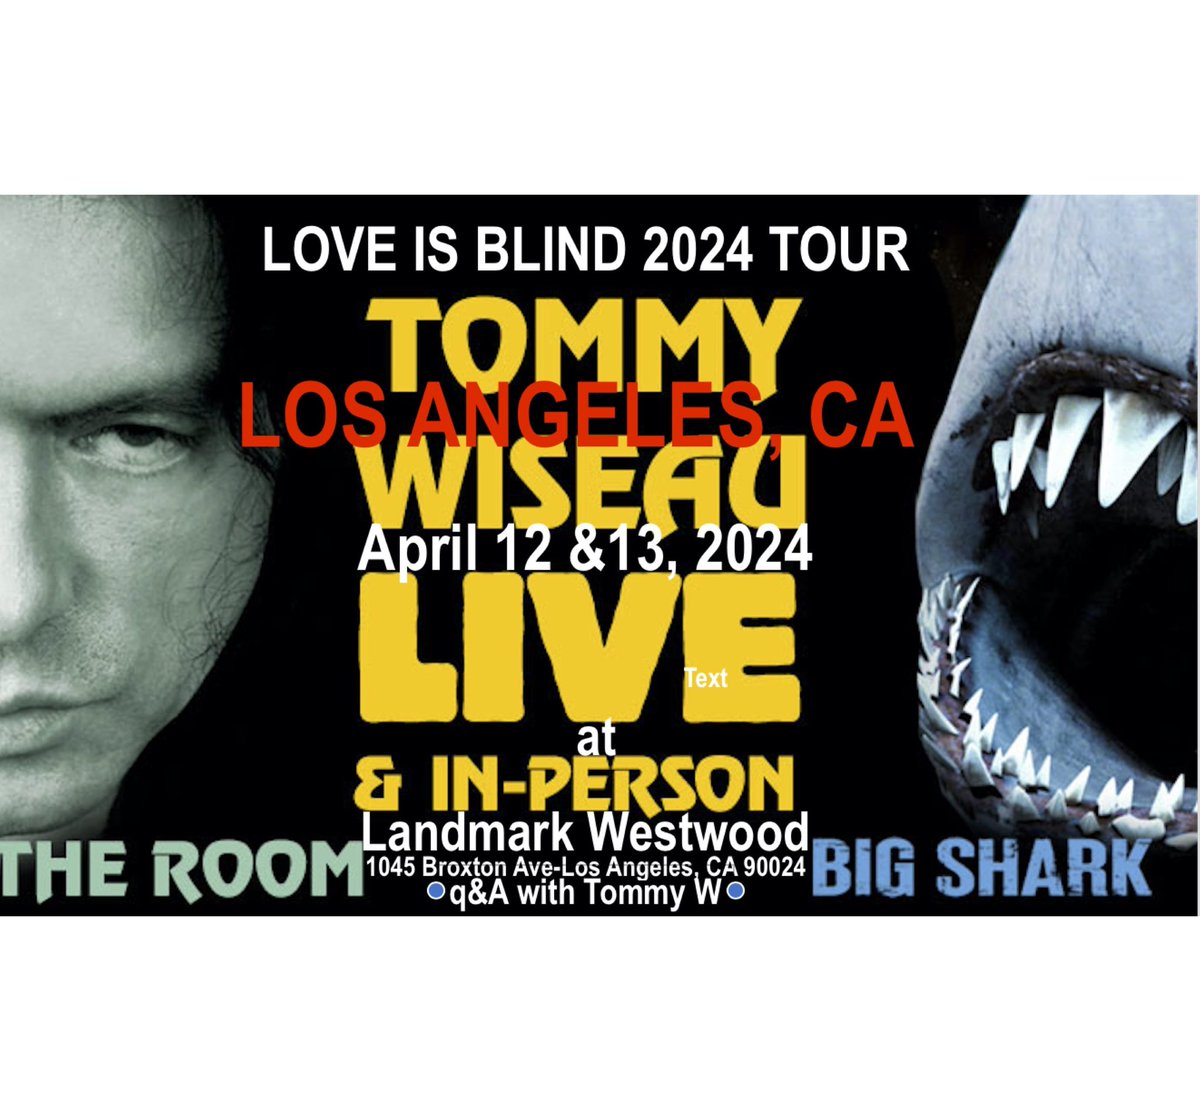 LOS ANGELES !! JOIN ME FOR LIVE Q&A TODAY !!! HAVE FUN SEE BIG SHARK & OR THE ROOM !!! THE ROOM April 12 & 13 landmarktheatres.com/movies/314280-… BIG SHARK April 12 & 13 landmarktheatres.com/movies/314900-… San Diego THE ROOM May 3,4 readingcinemas.com/grossmont/movi… BIG SHARK May 3, 4 readingcinemas.com/grossmont/movi…